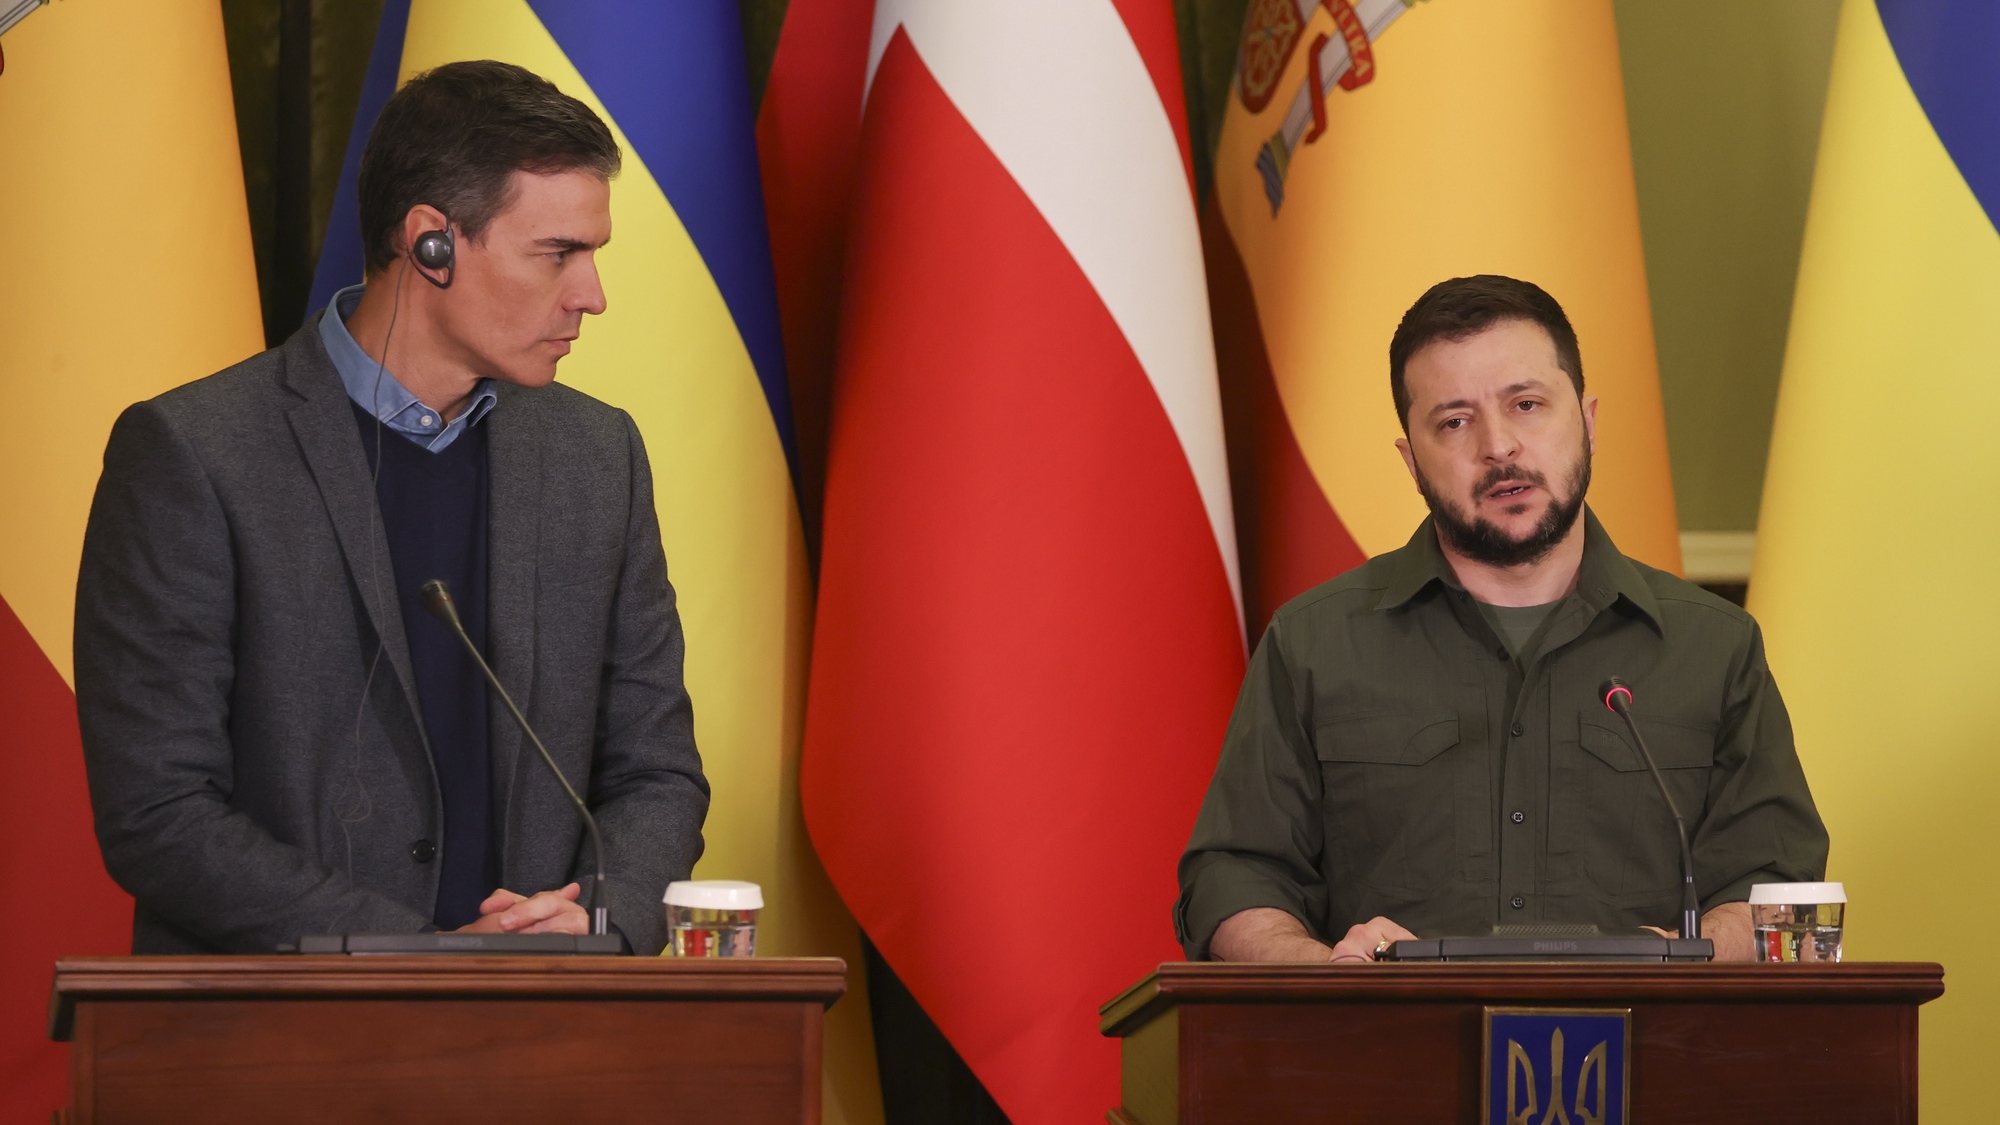 epa09900610 Spanish Prime Minister, Pedro Sanchez (L), and Ukrainian President, Volodymyr Zelensky (C), address a joint press conference in the framework of their meeting in Kyiv (Kiev), Ukraine, 21 April 2022. Spanish Prime Minister, Pedro Sanchez, and his Danish counterpart, Mette Frederiksen, are visiting the country to show their support to Ukrainian President, Volodymyr Zelensky, amid the Russia&#039;s invasion of the country.  EPA/MIGUEL GUTIERREZ